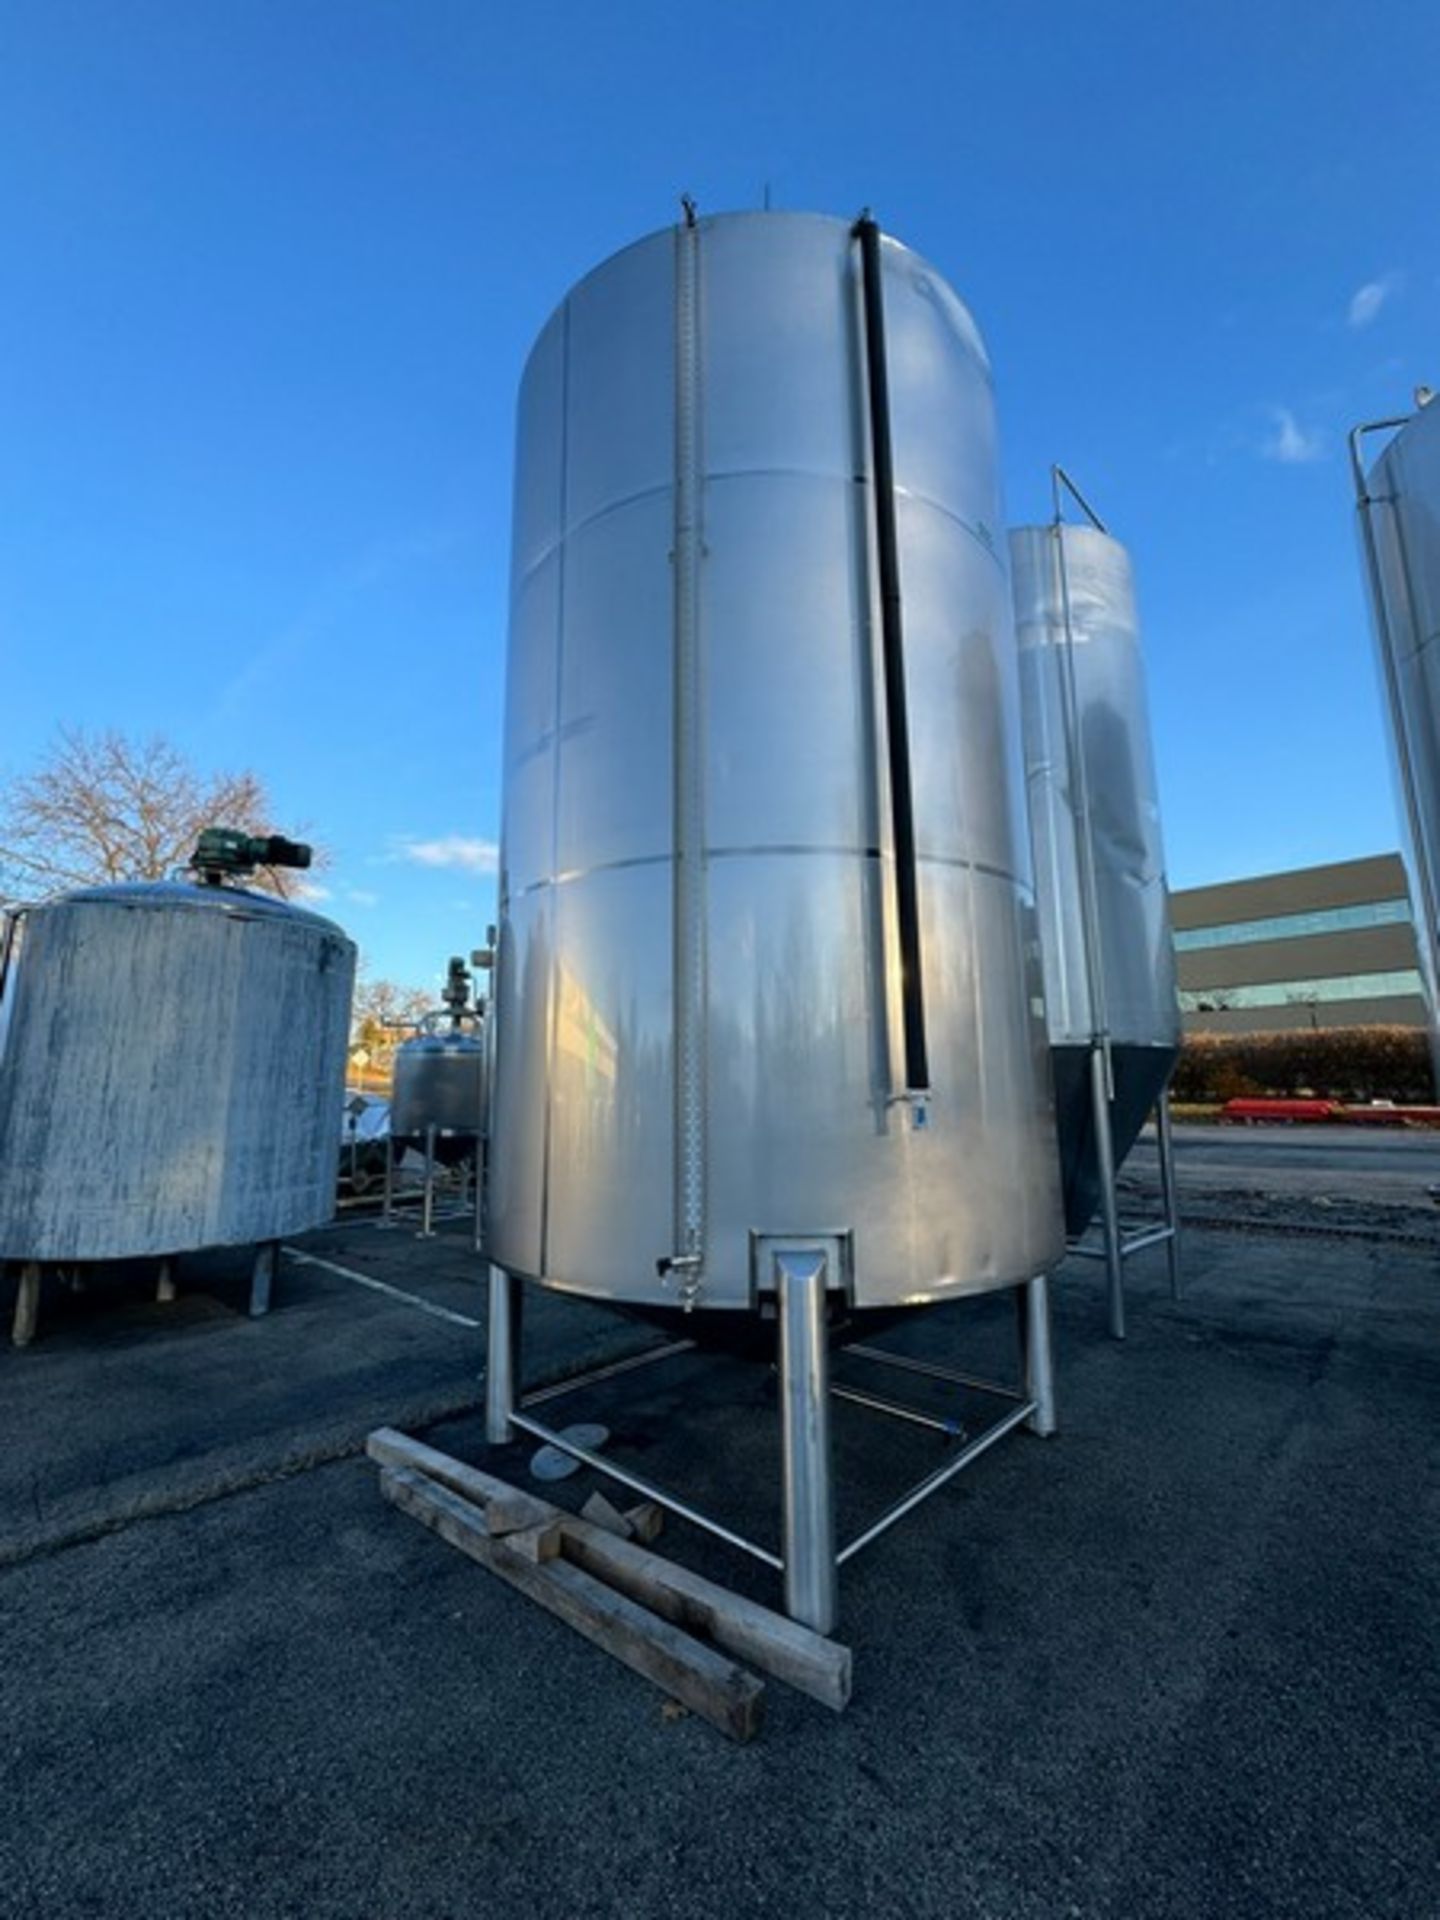 2012 Specific Mechanical Systems 200 BBL Capacity S/S Cold Liquor Tank, S/N RMP-136-12-300, with S/S - Image 2 of 11